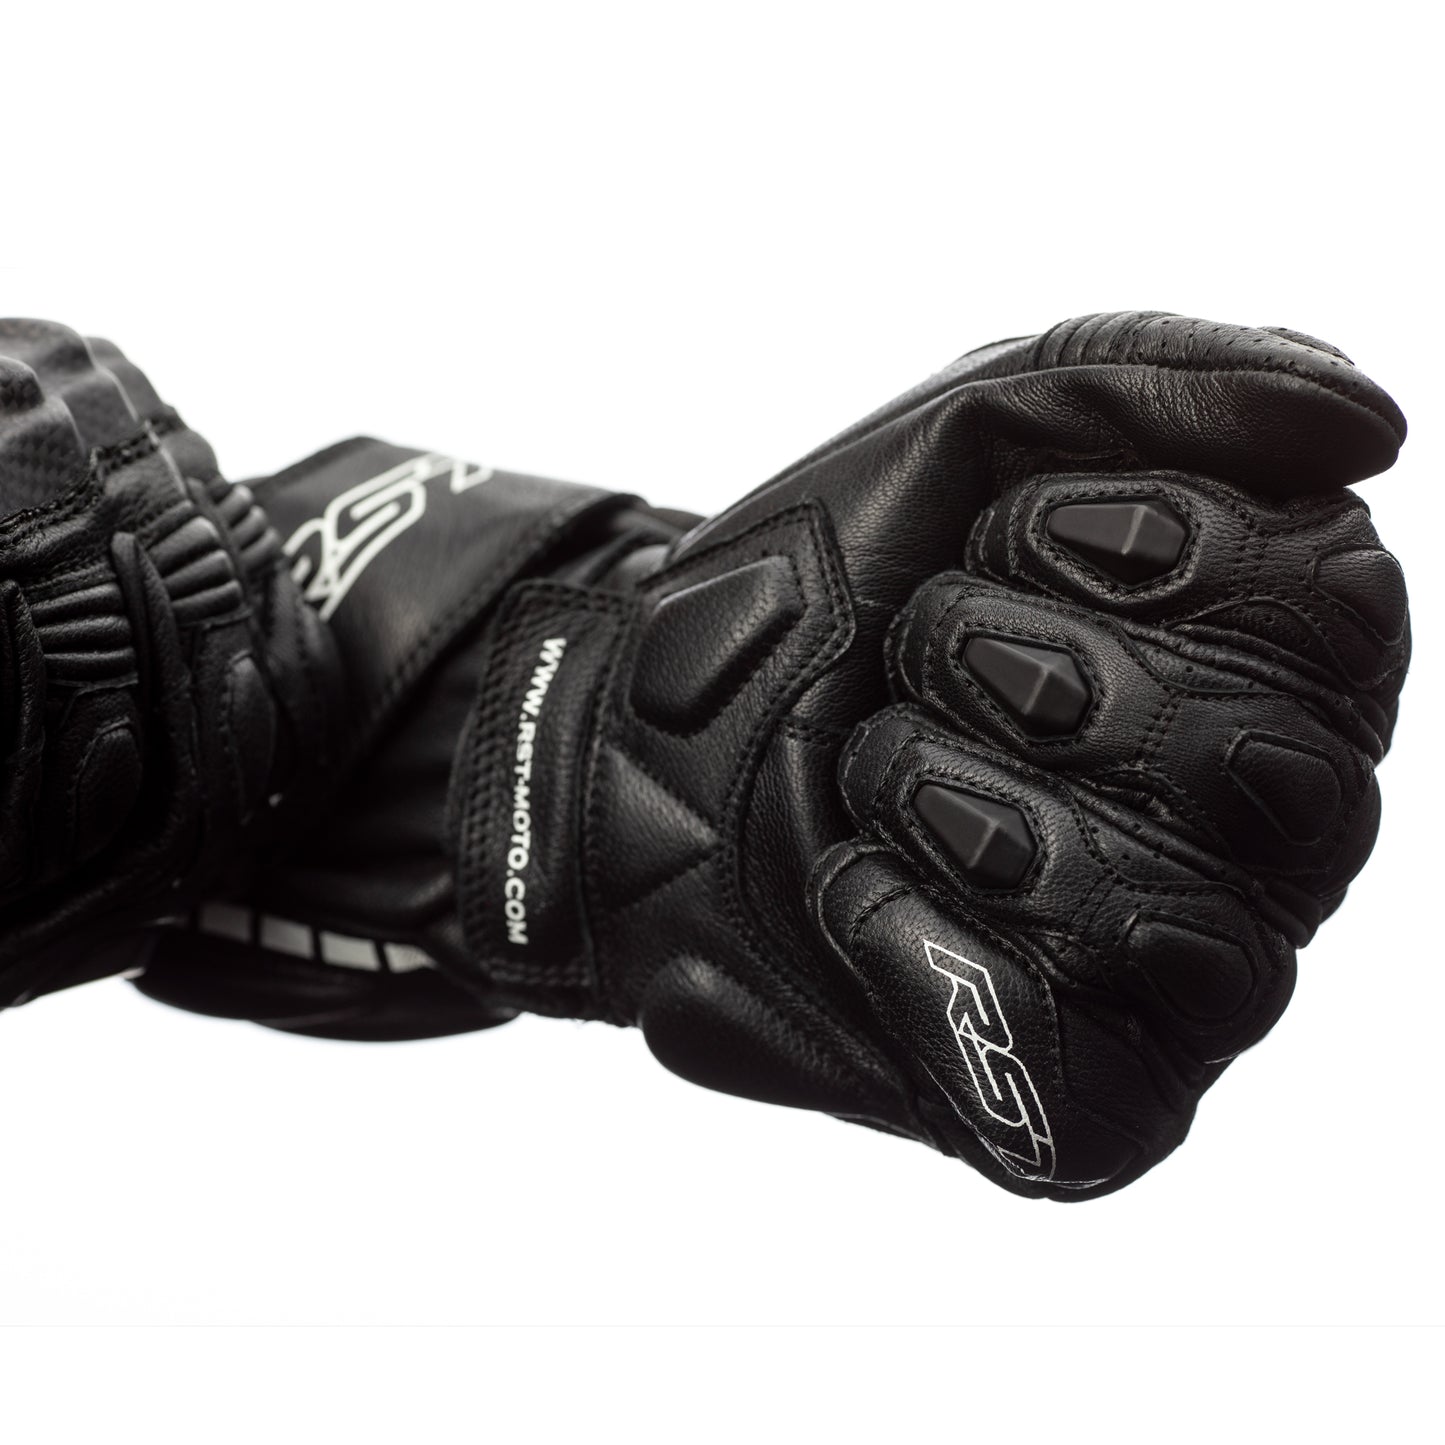 RST Axis Leather Riding Gloves - CE APPROVED - Black